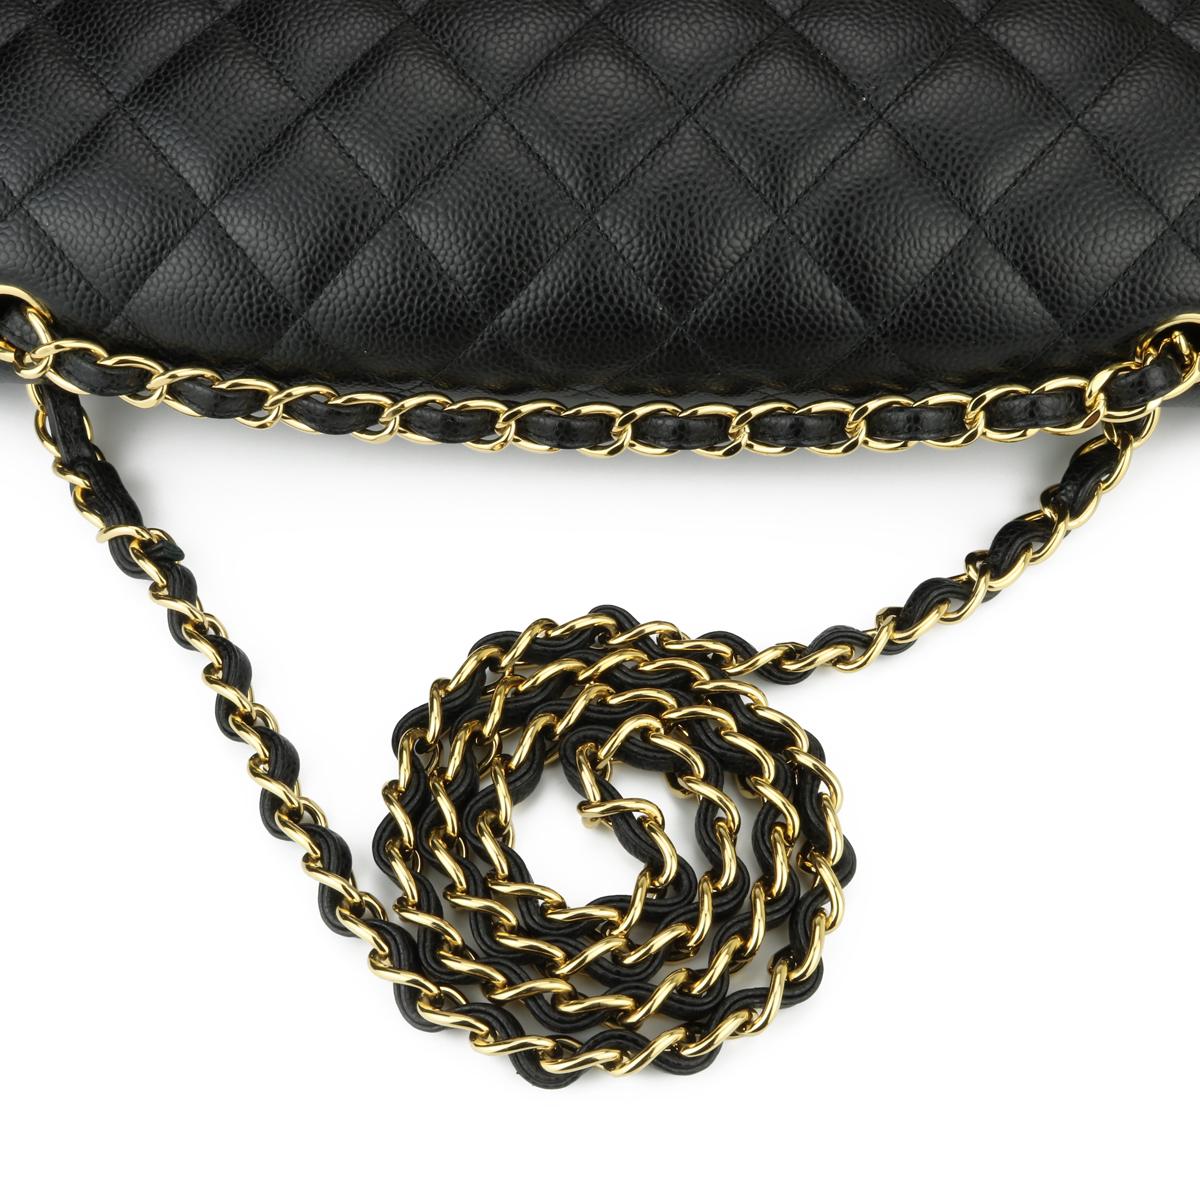 CHANEL Double Flap Maxi Bag Black Caviar with Gold Hardware 2018 5